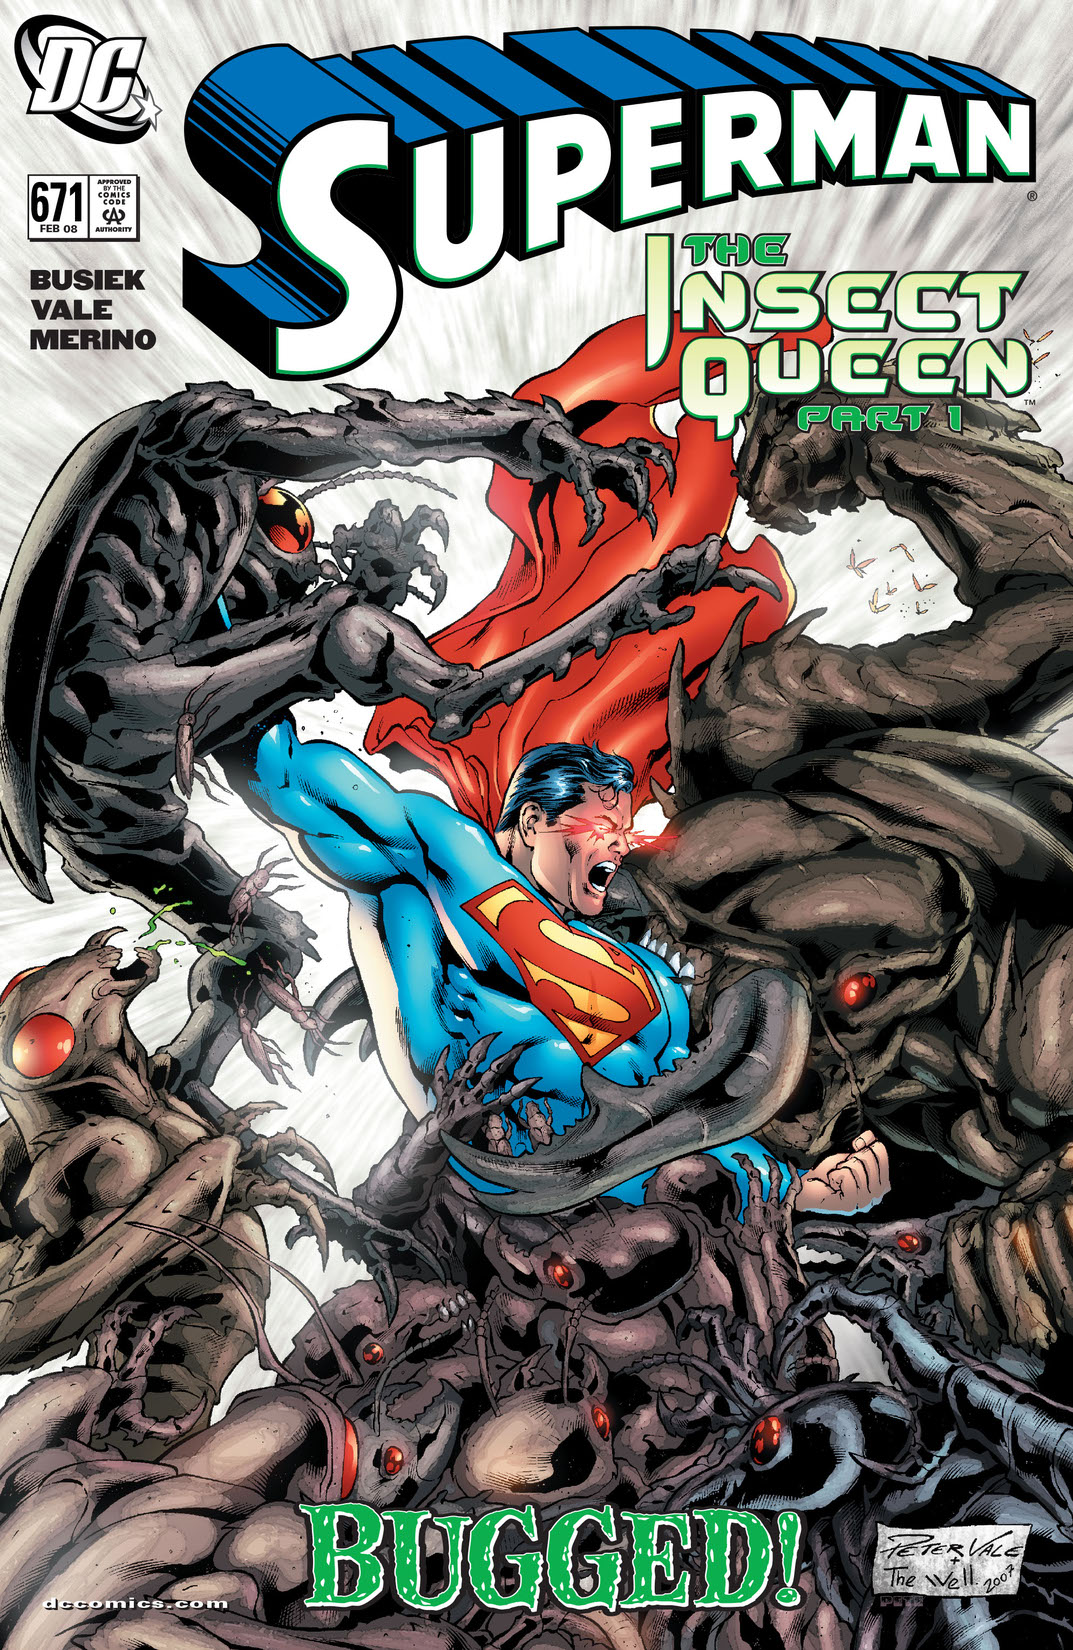 Superman (2006-) #671 preview images